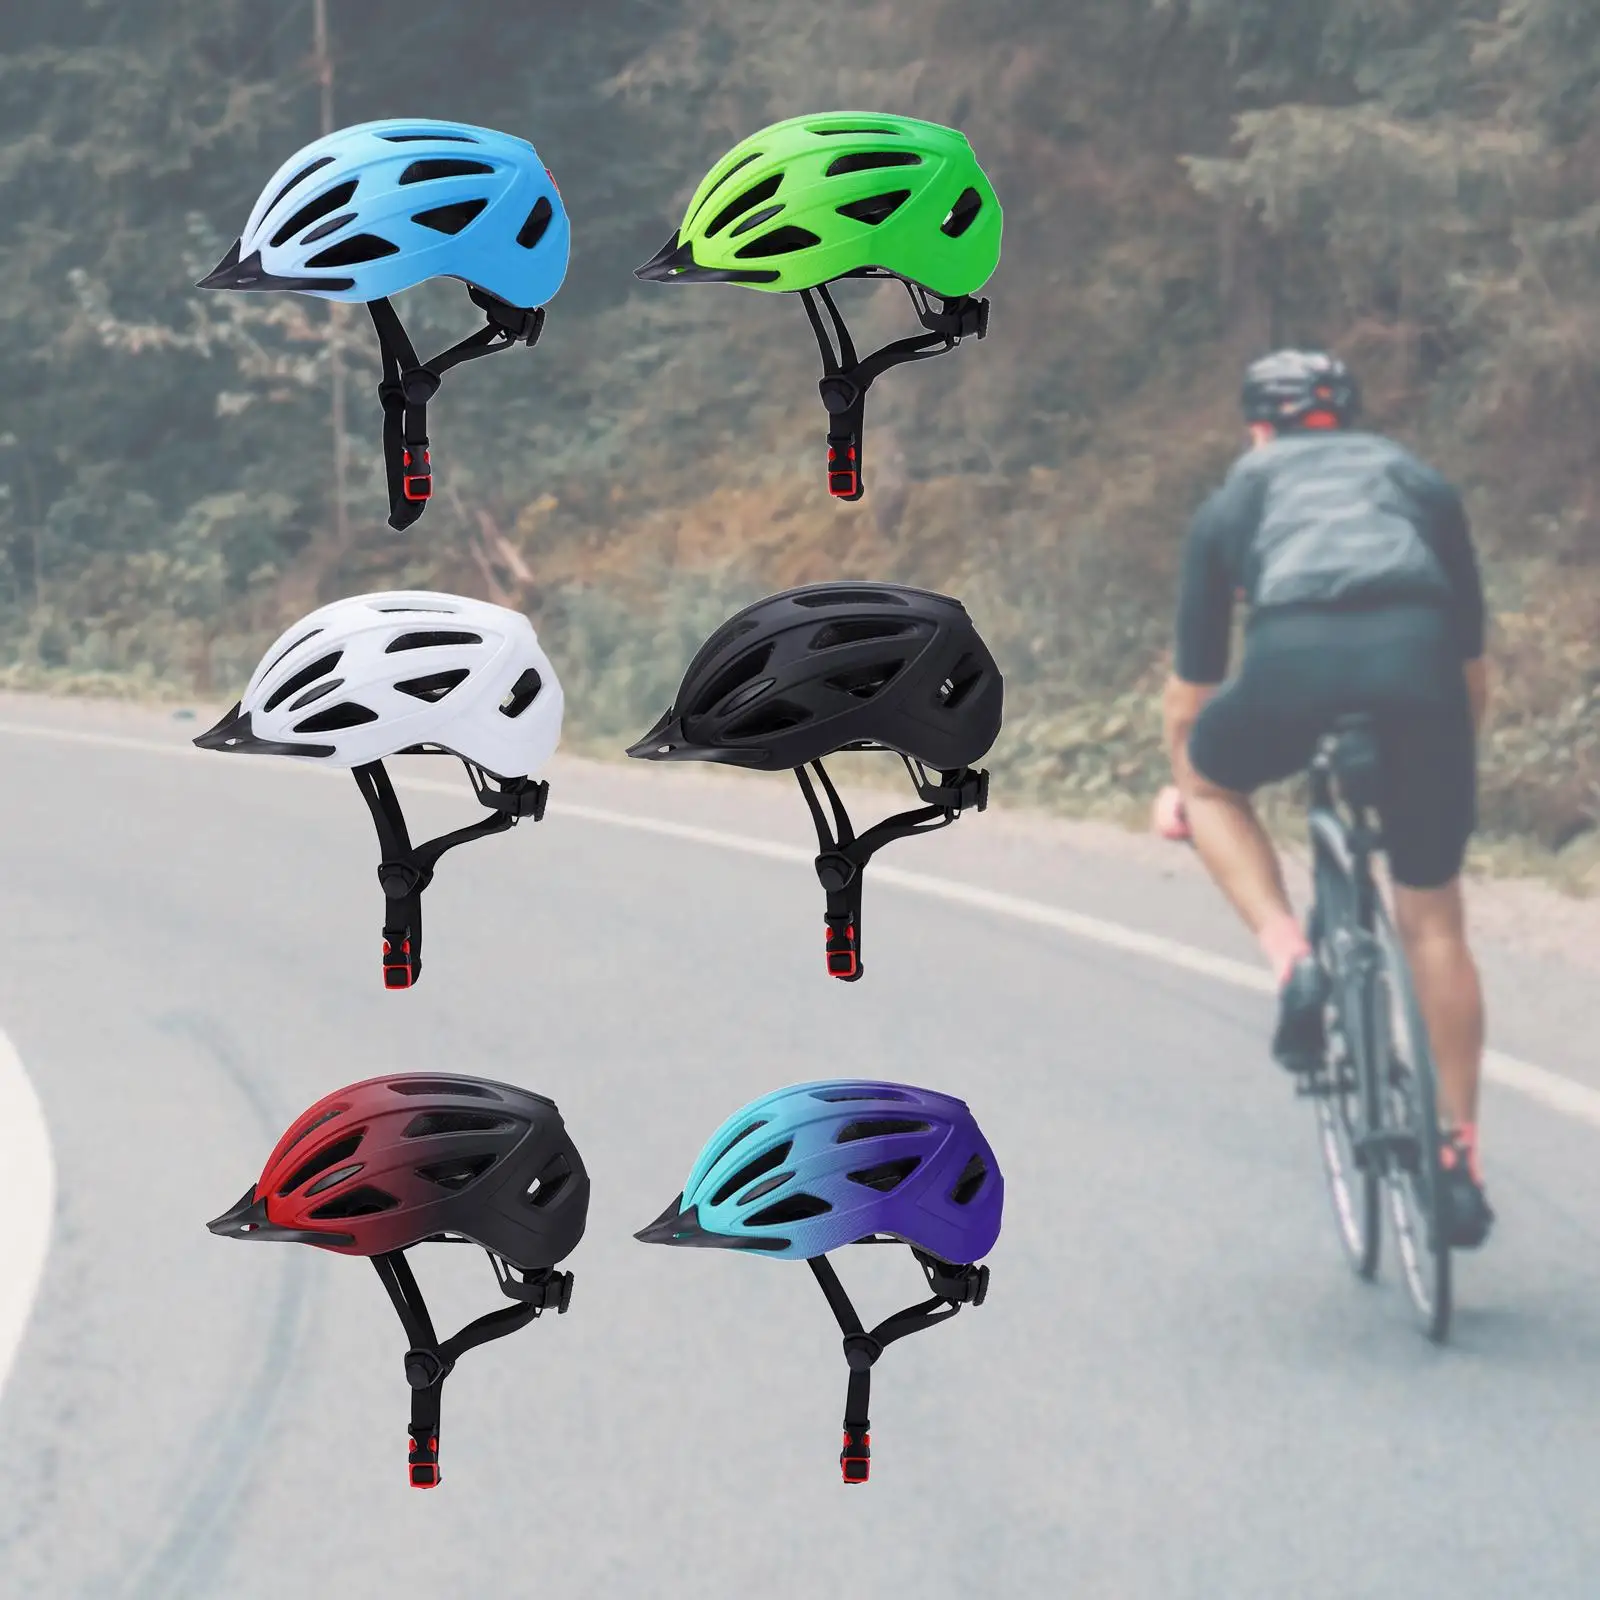 Bike Helmet Cycling Accessories with LED Safety Light Outdoor Bicycle Helmet